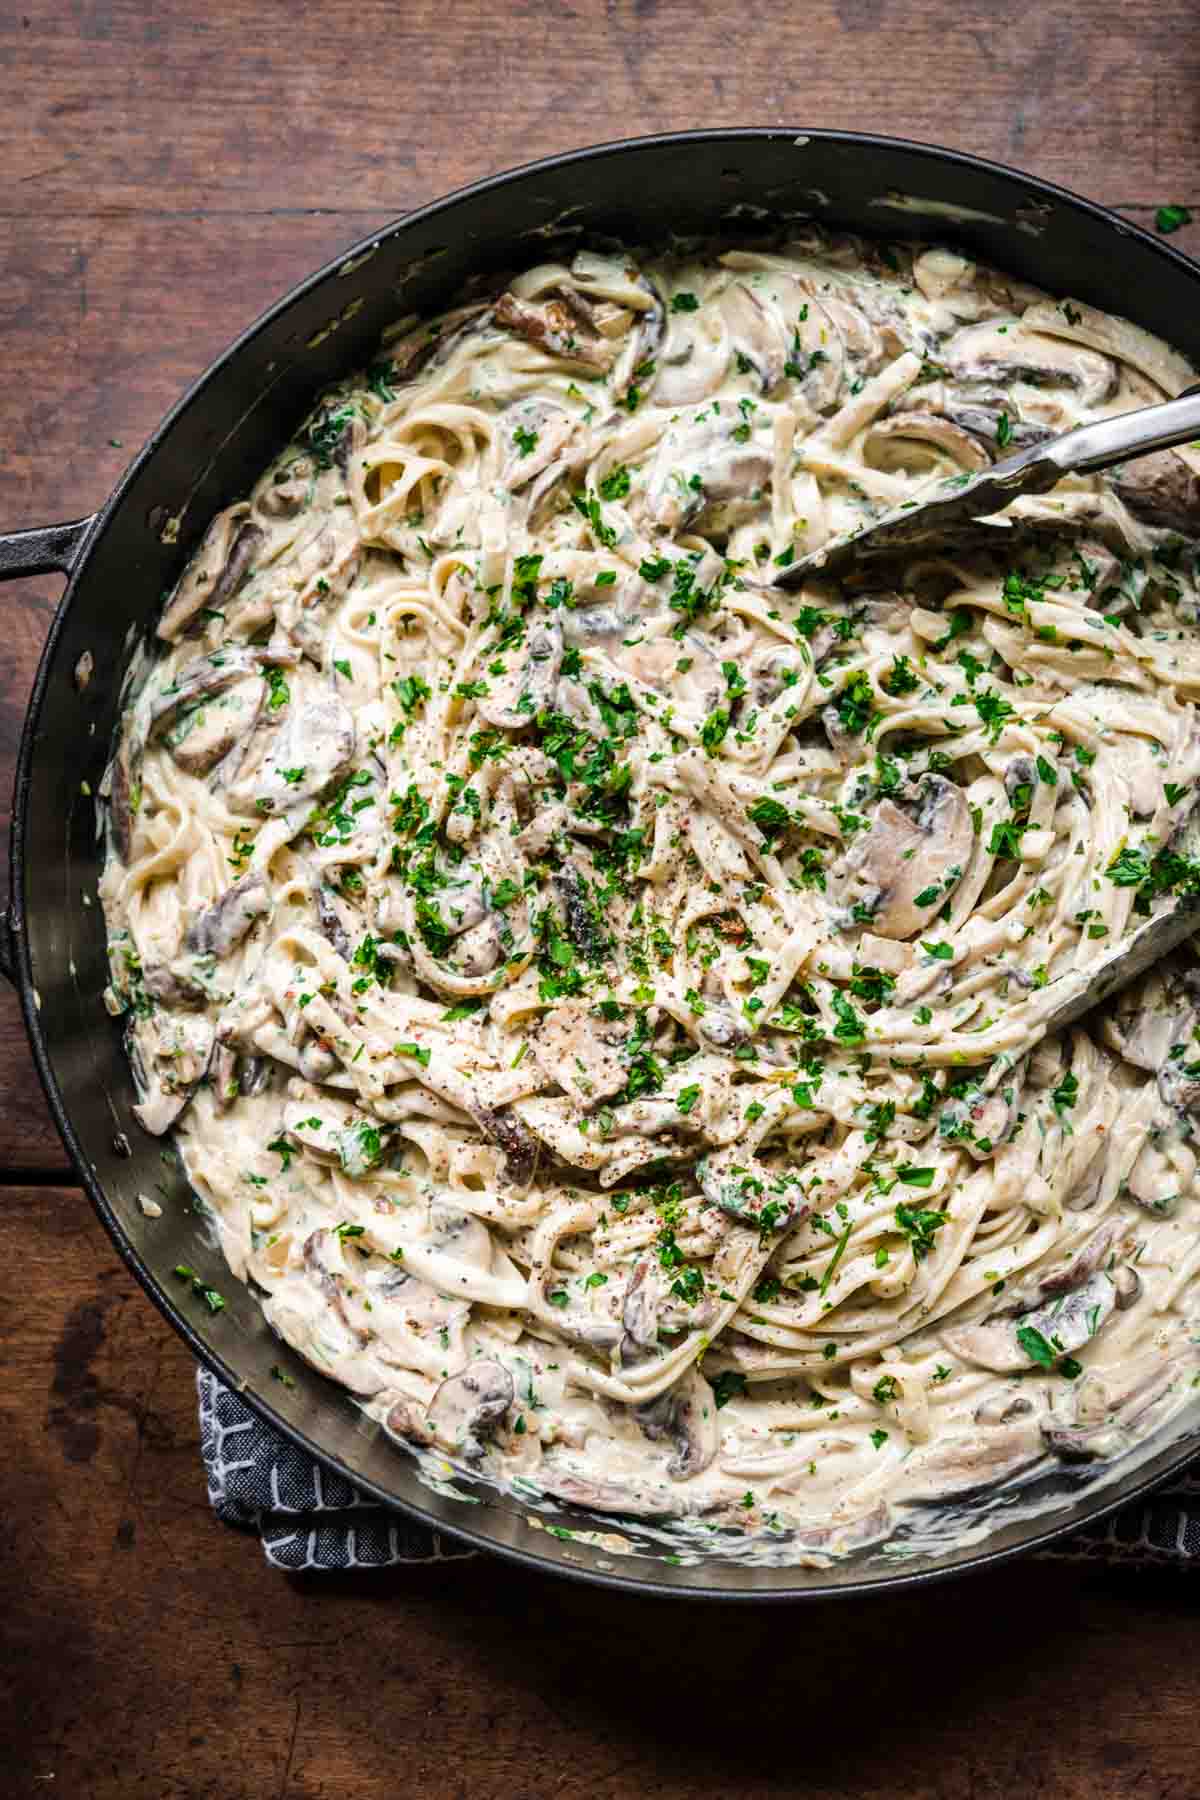 Overhead view of mushroom alfredo in a pot garnished with parsley.